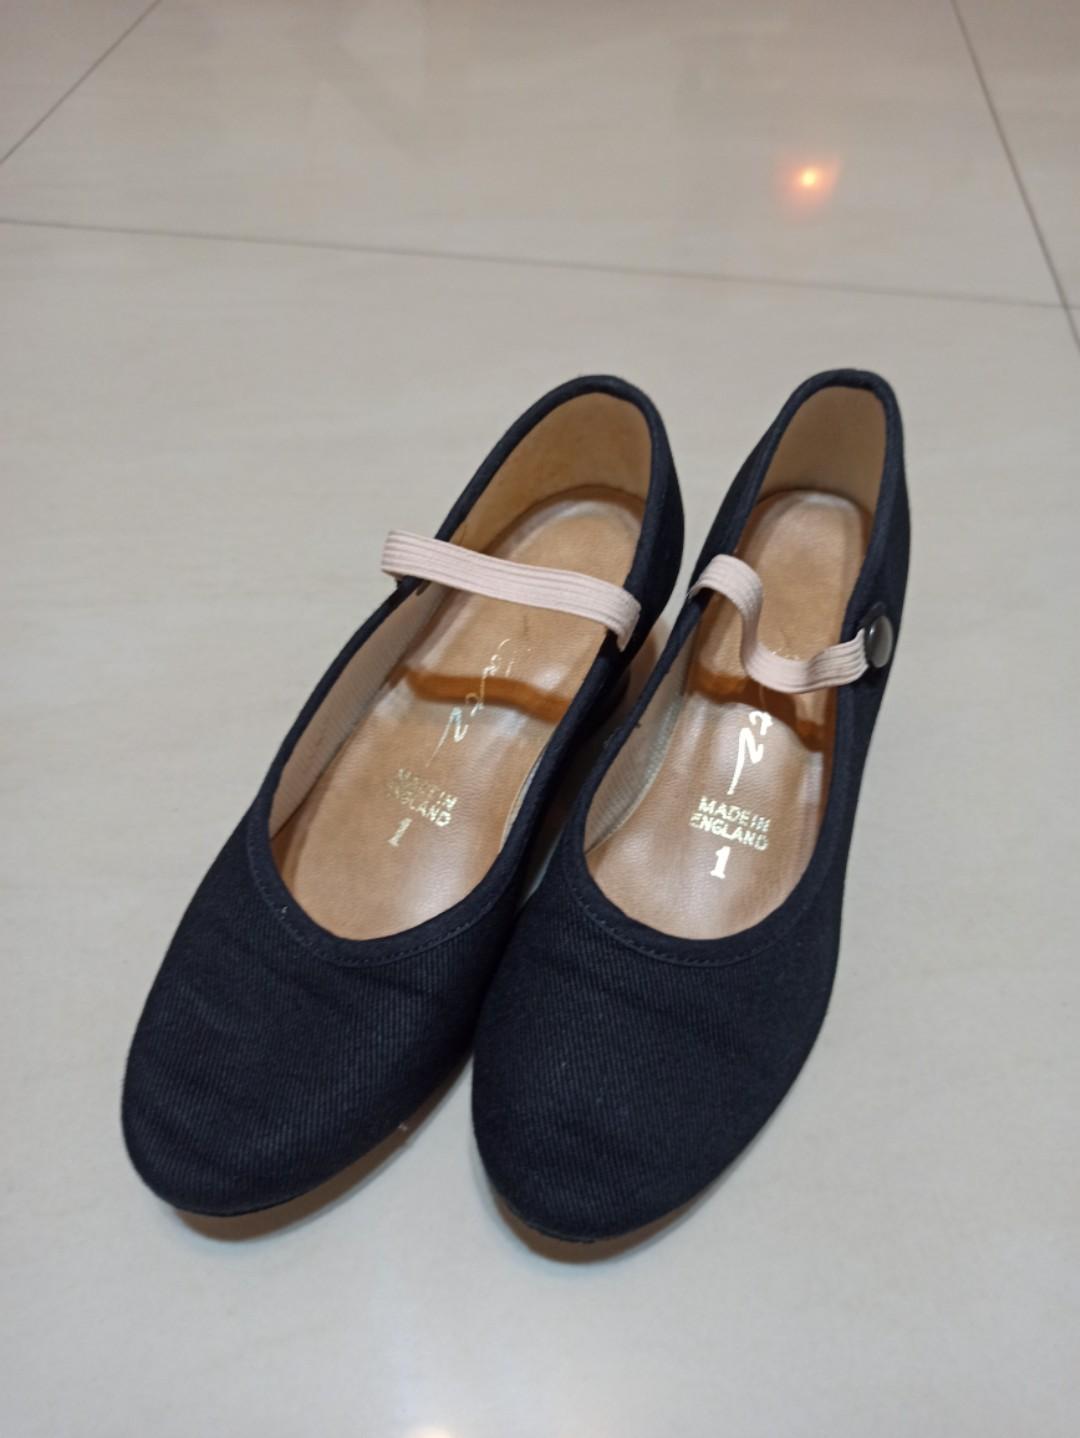 Ballet Character Shoes (High heel) Size 